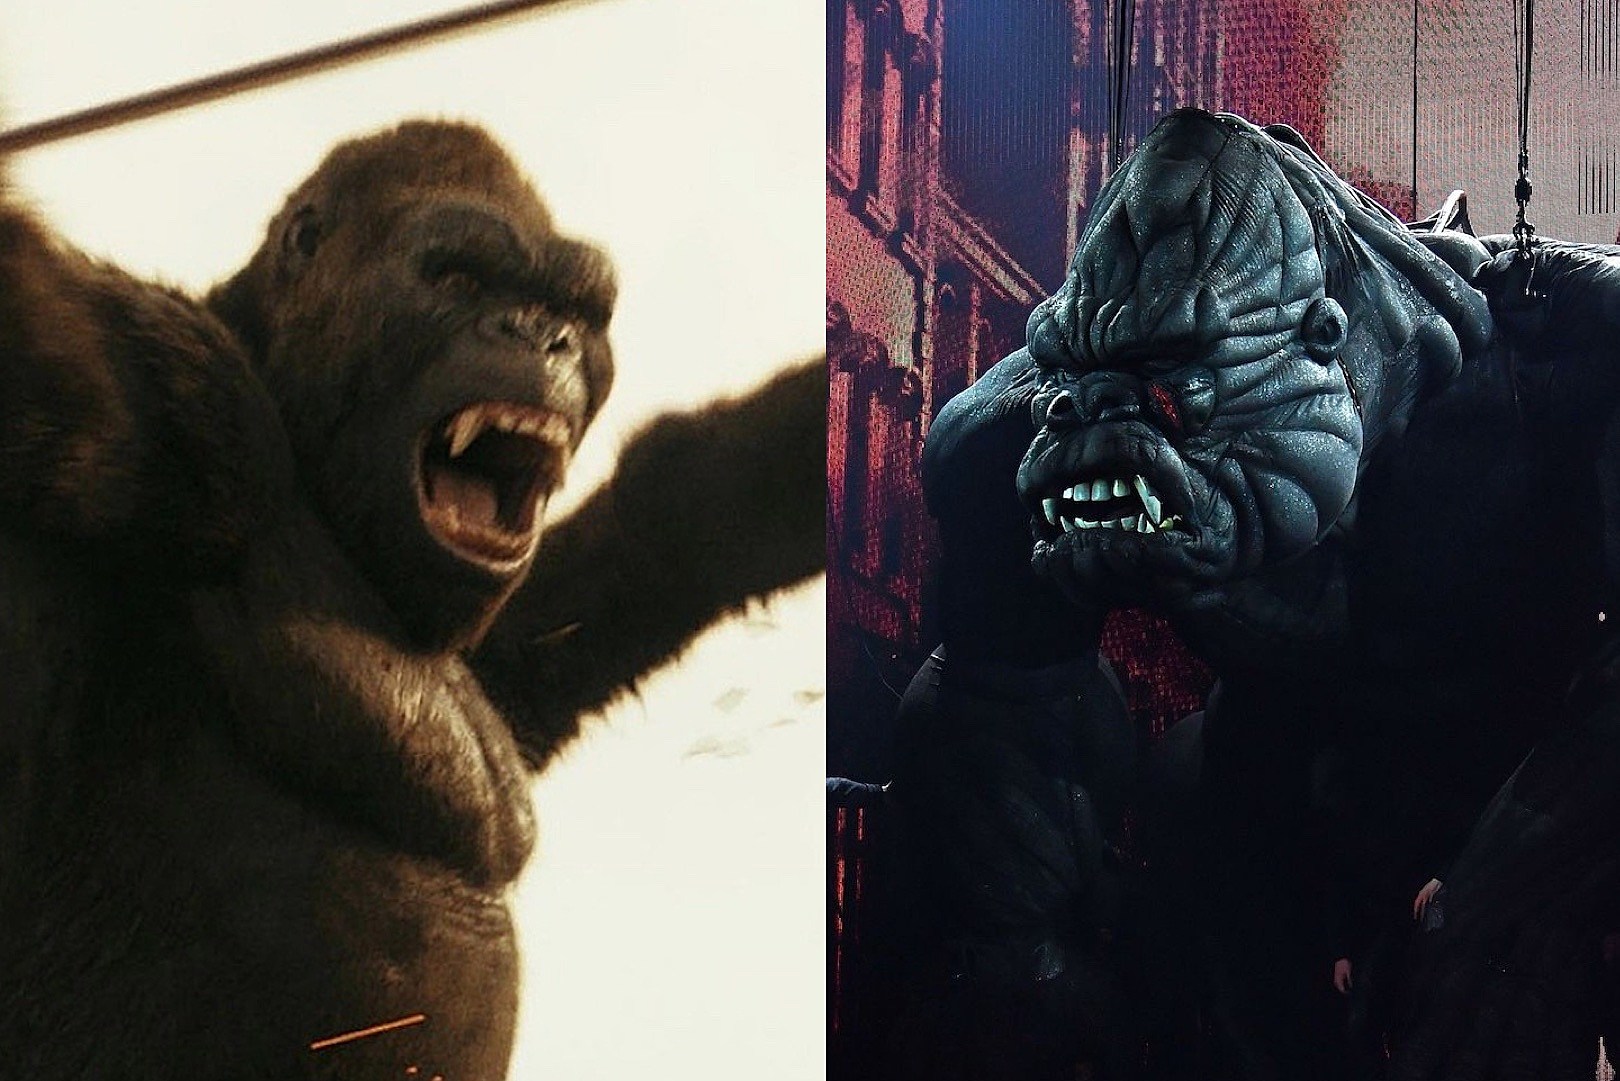 New King Kong game roasted for absolutely appalling graphics